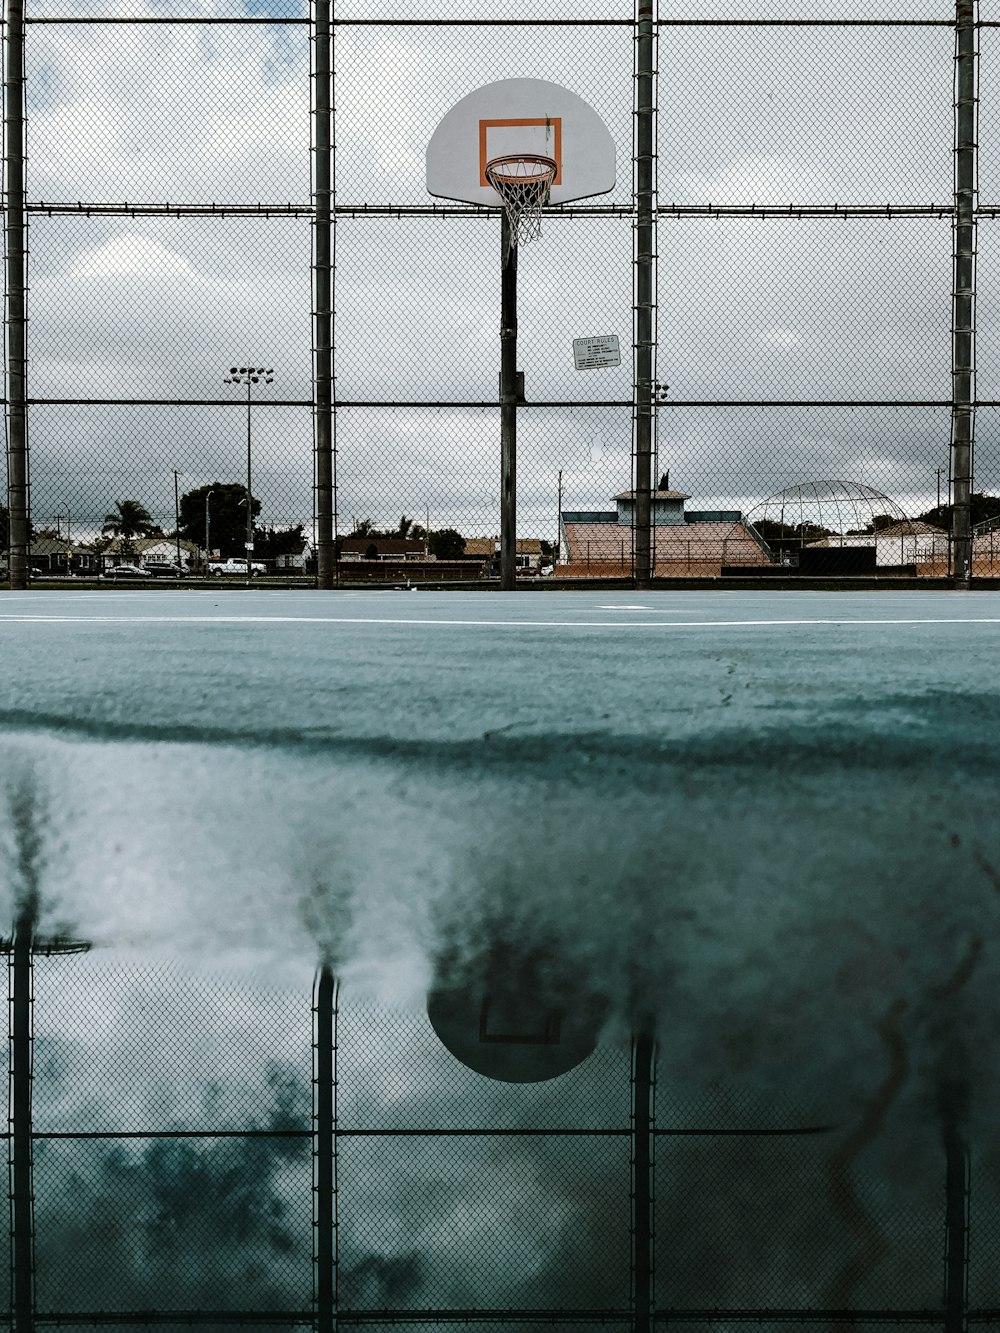 a reflection of a basketball hoop in a pool of water